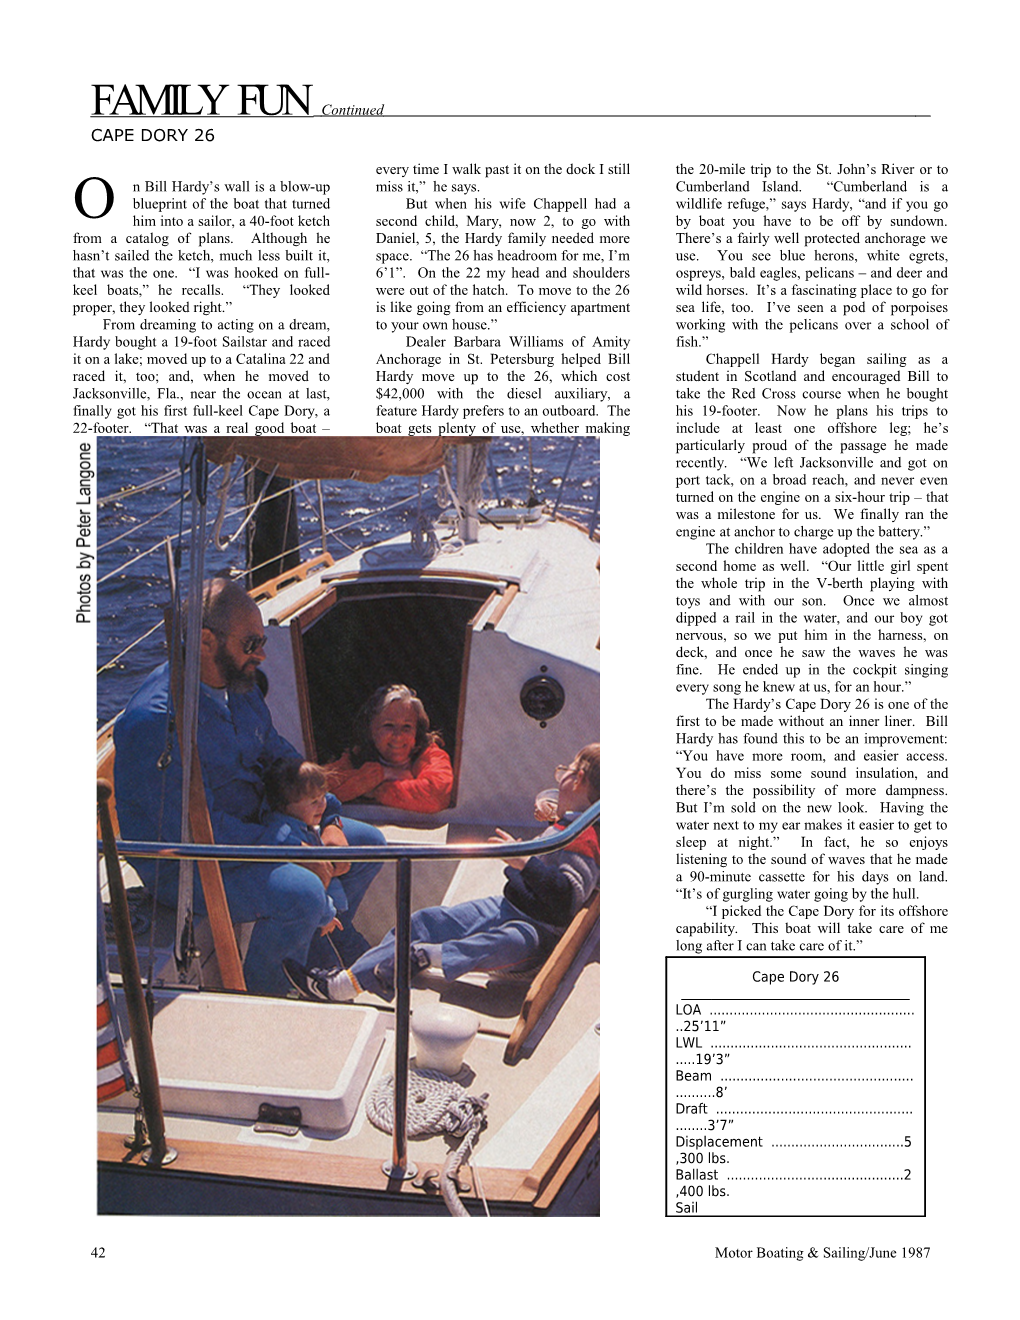 Cape Dory 26 - Motor Boating and Sailing Article